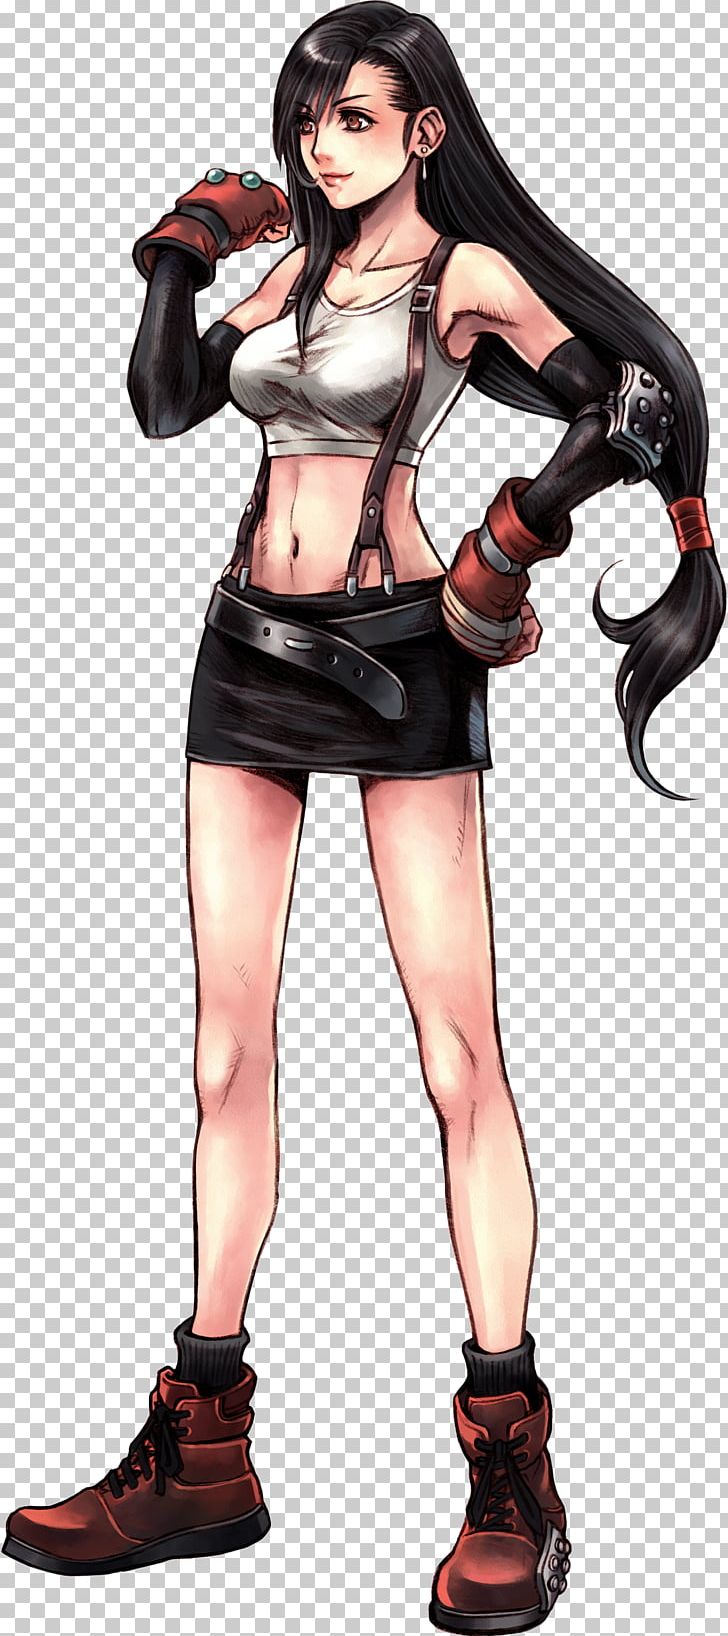 Crisis Core: Final Fantasy VII Dissidia Final Fantasy Dissidia 012 Final Fantasy Dirge Of Cerberus: Final Fantasy VII PNG, Clipart, Black Hair, Brown Hair, Character, Cloud Strife, Costume Free PNG Download